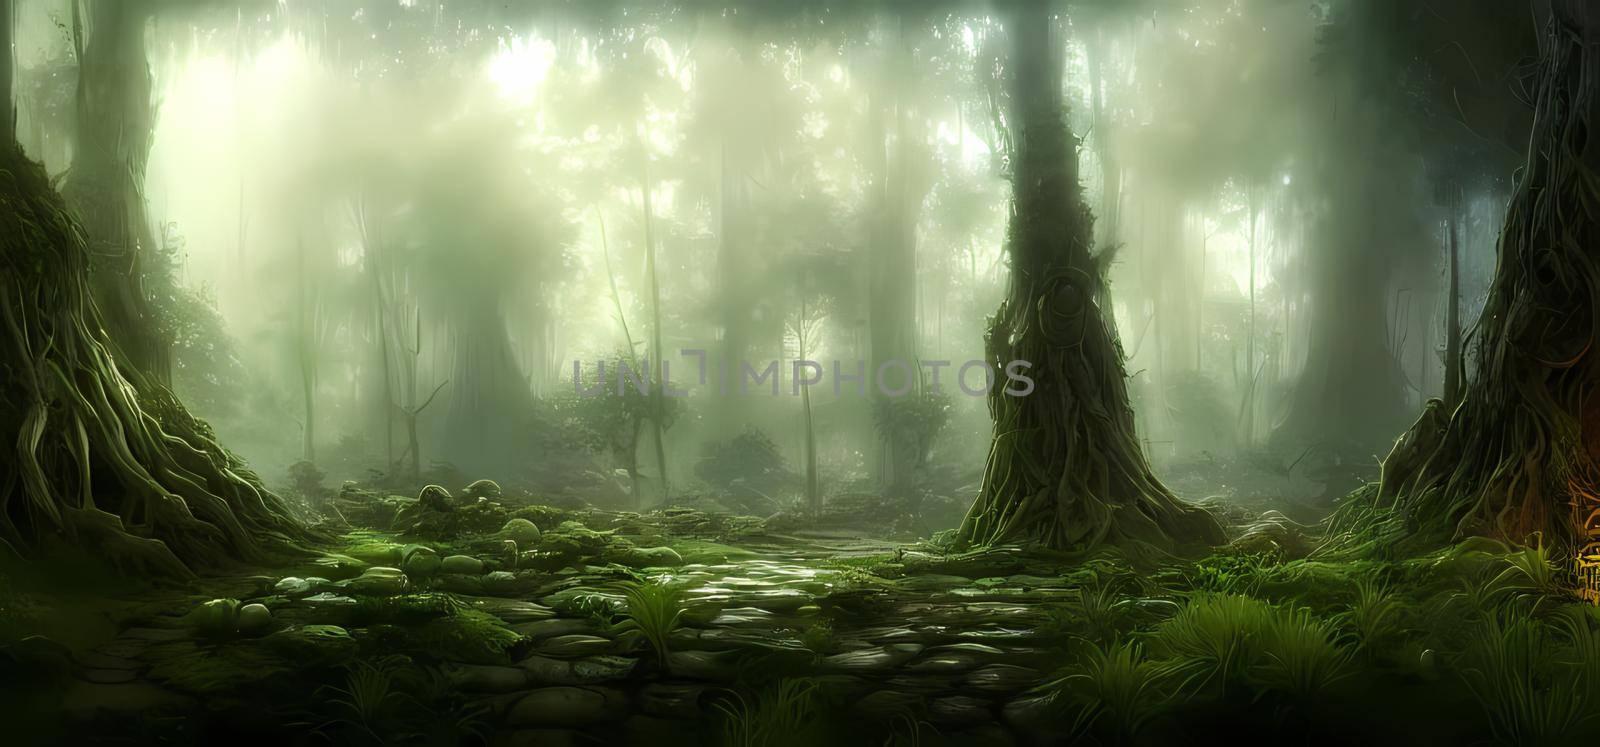 Beautiful magical forest fabulous trees. Forest landscape.Digital art painting for background wallpaper, concept art. by yay_lmrb